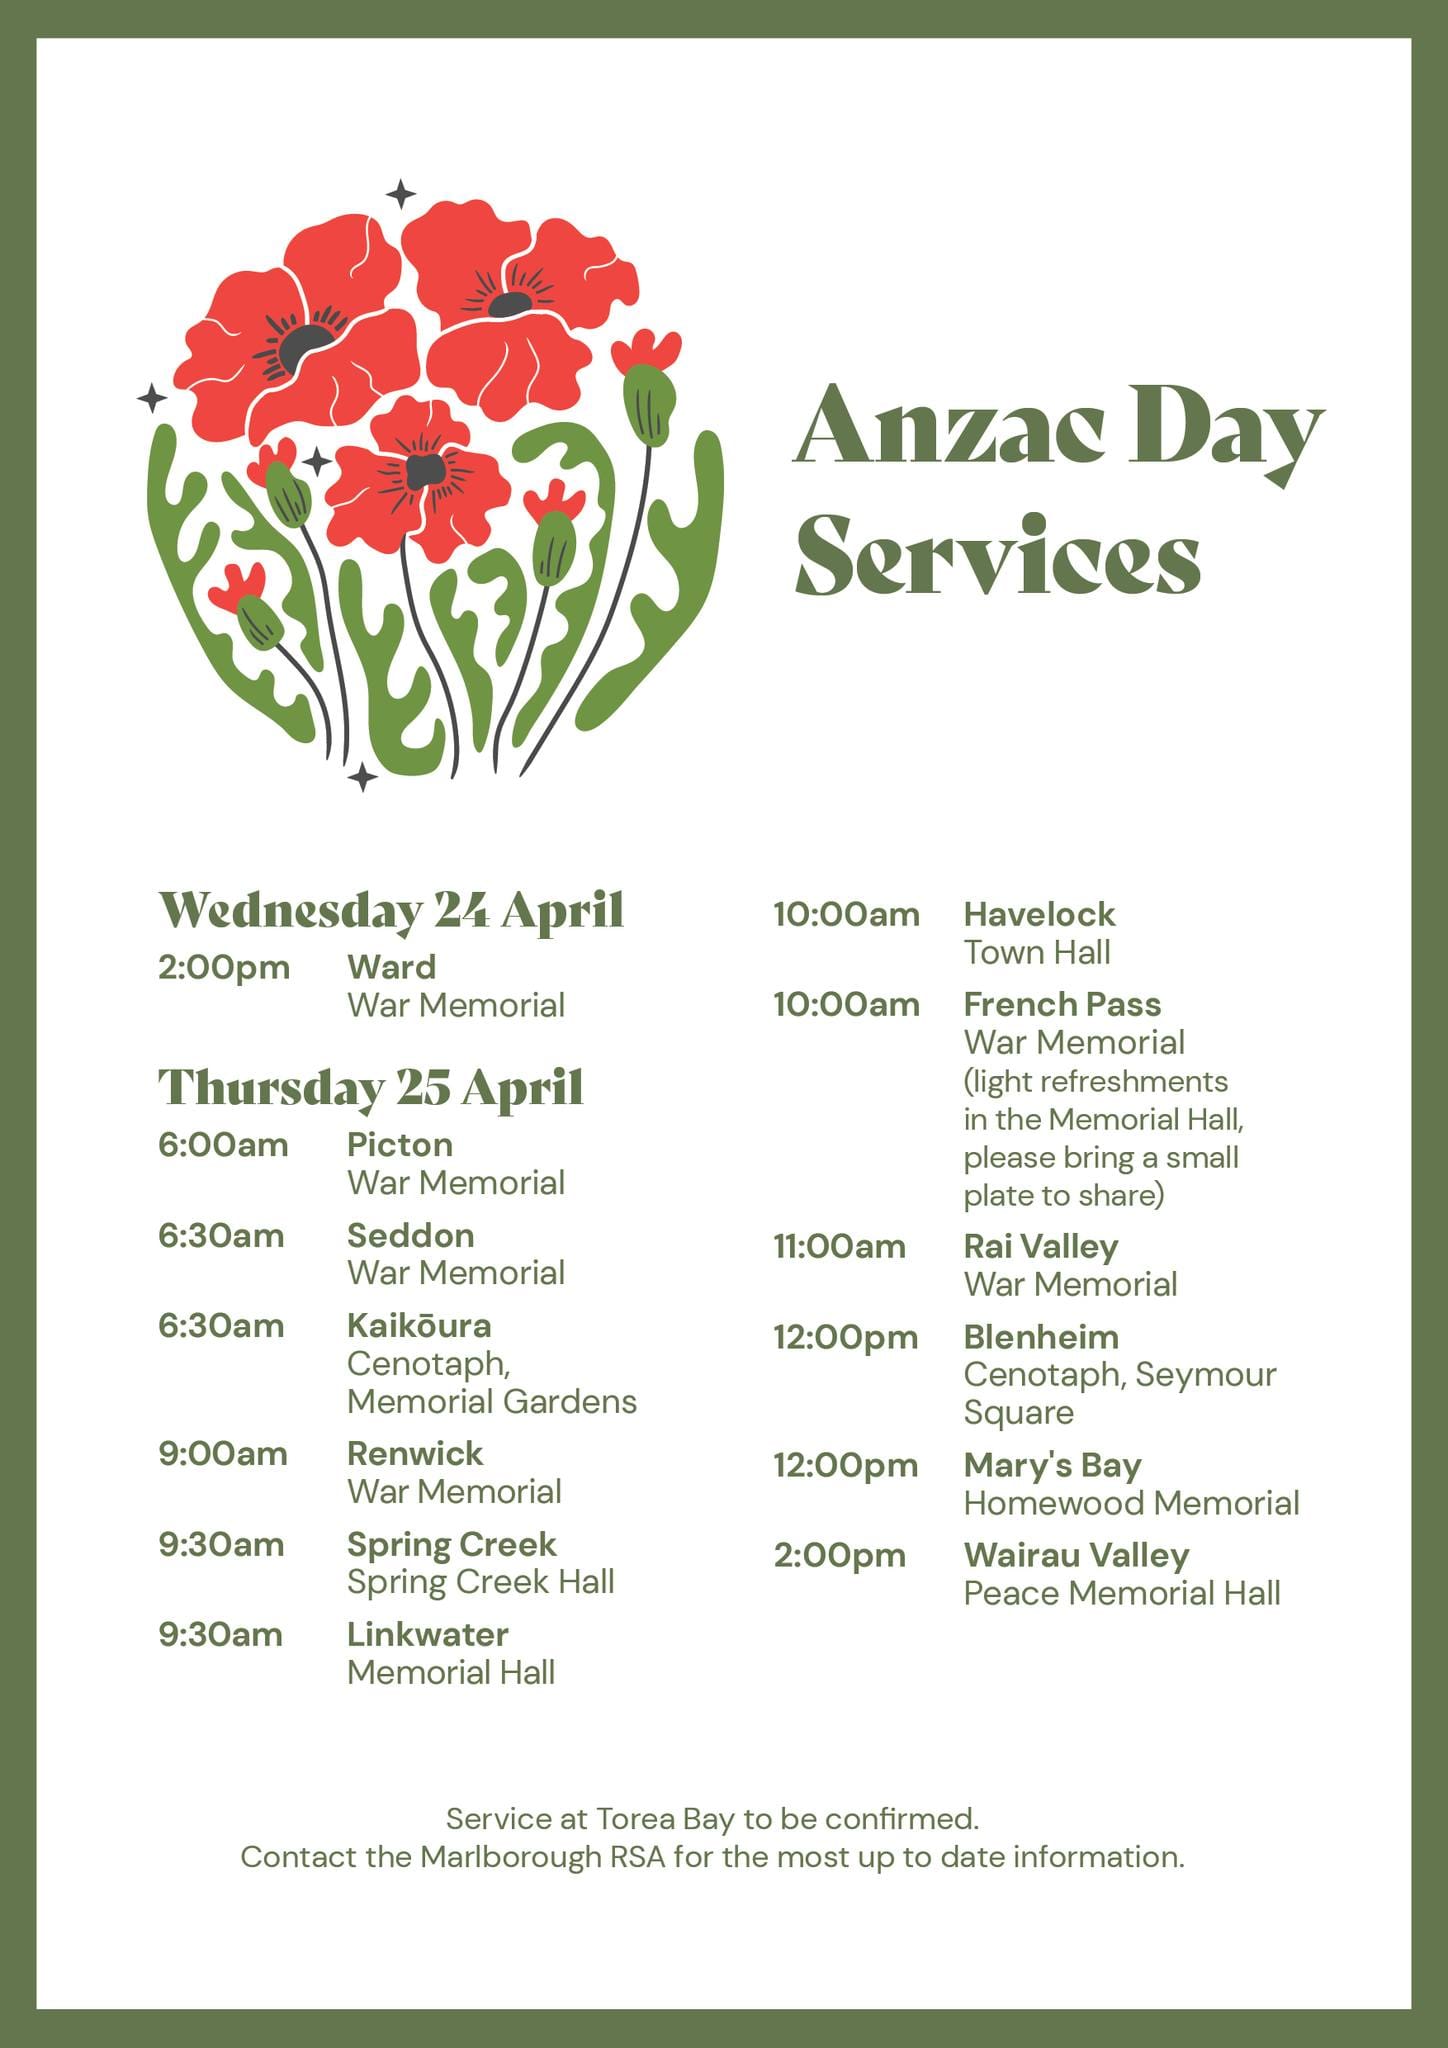 Anzac Day commemorations